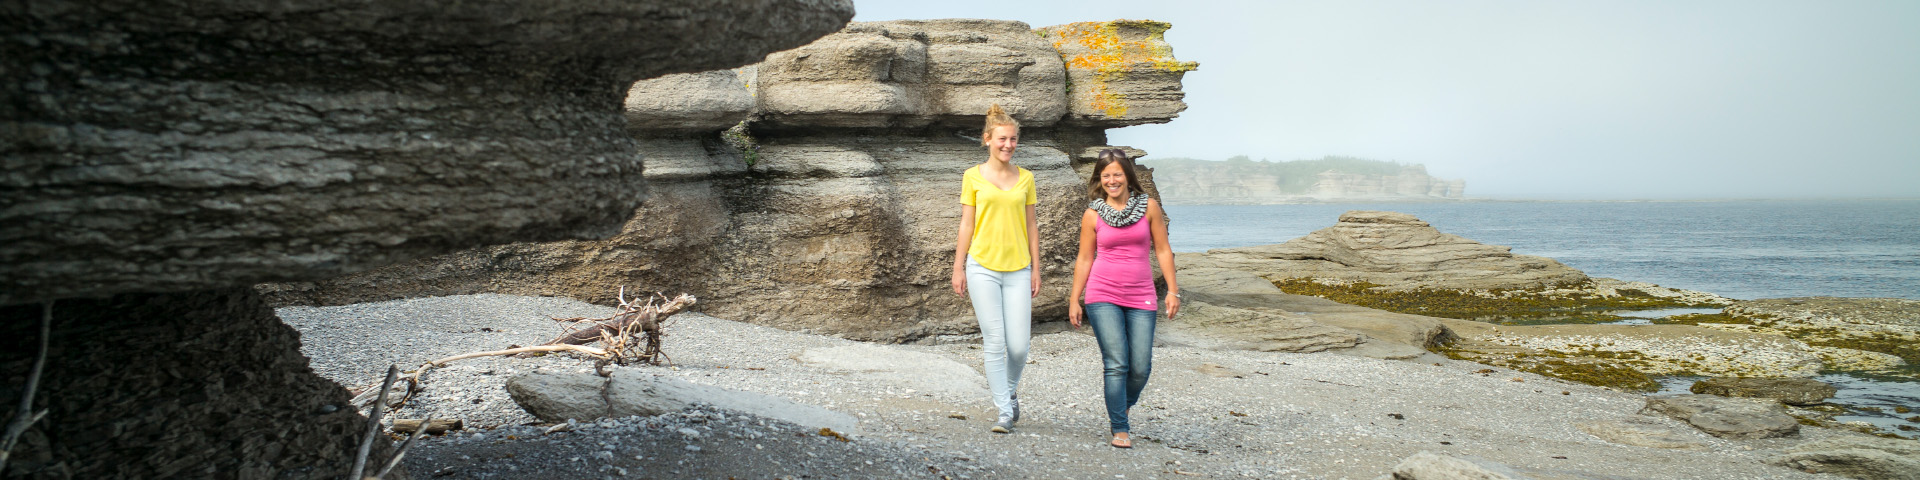 A woman and her daughter are walking on the shore near monoliths